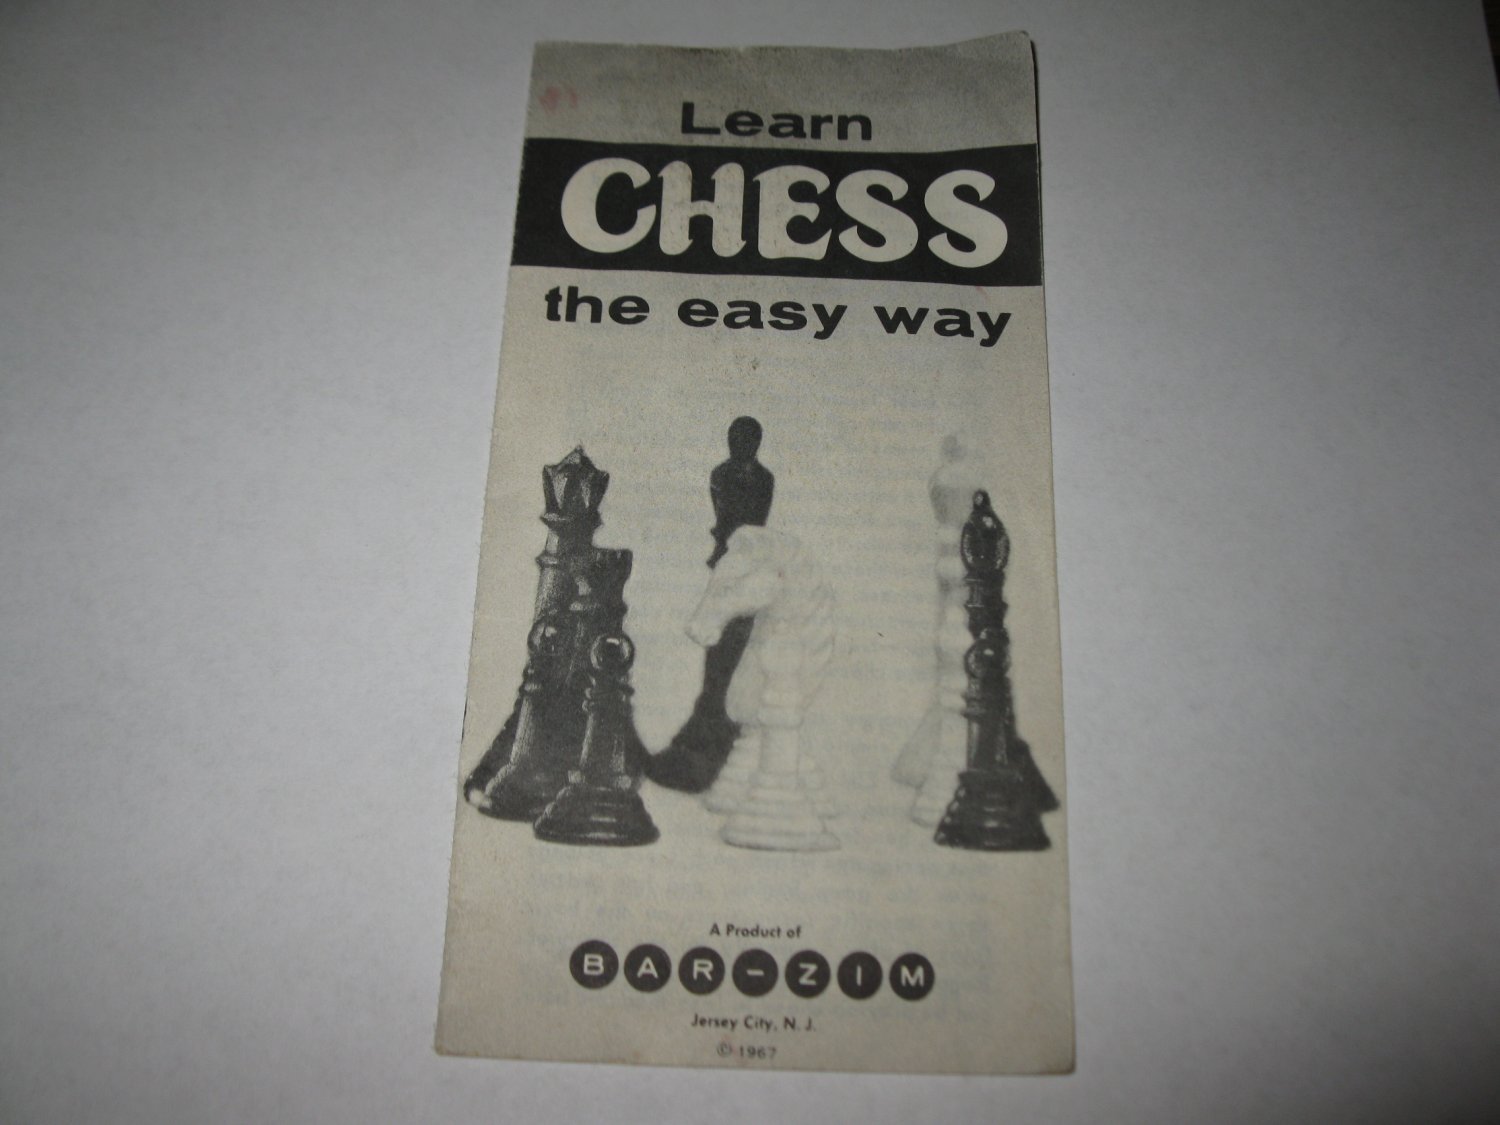 1967 Bar-Zim Classic Chess Board Game Piece: Instruction Booklet - $2.50